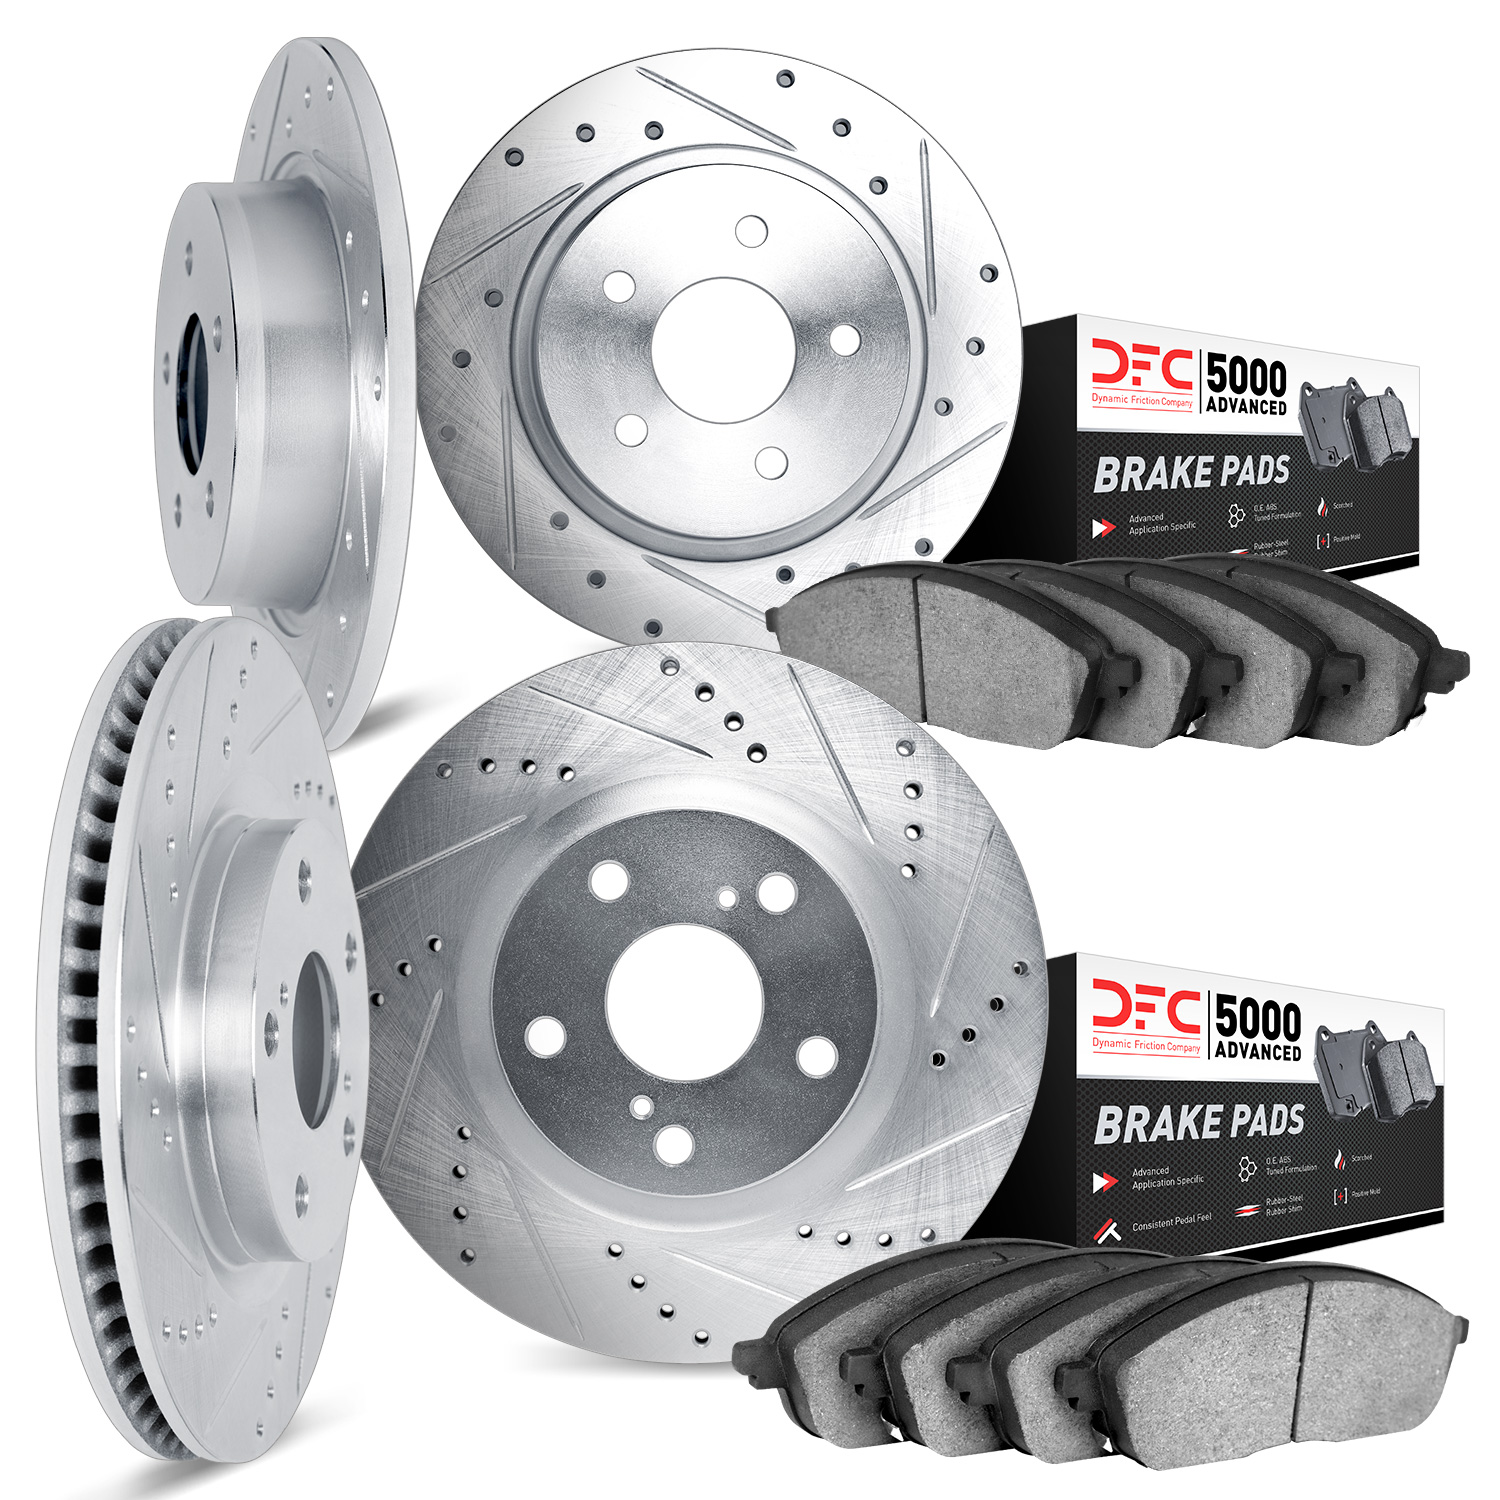 7504-76158 Drilled/Slotted Brake Rotors w/5000 Advanced Brake Pads Kit [Silver], 2004-2005 Lexus/Toyota/Scion, Position: Front a